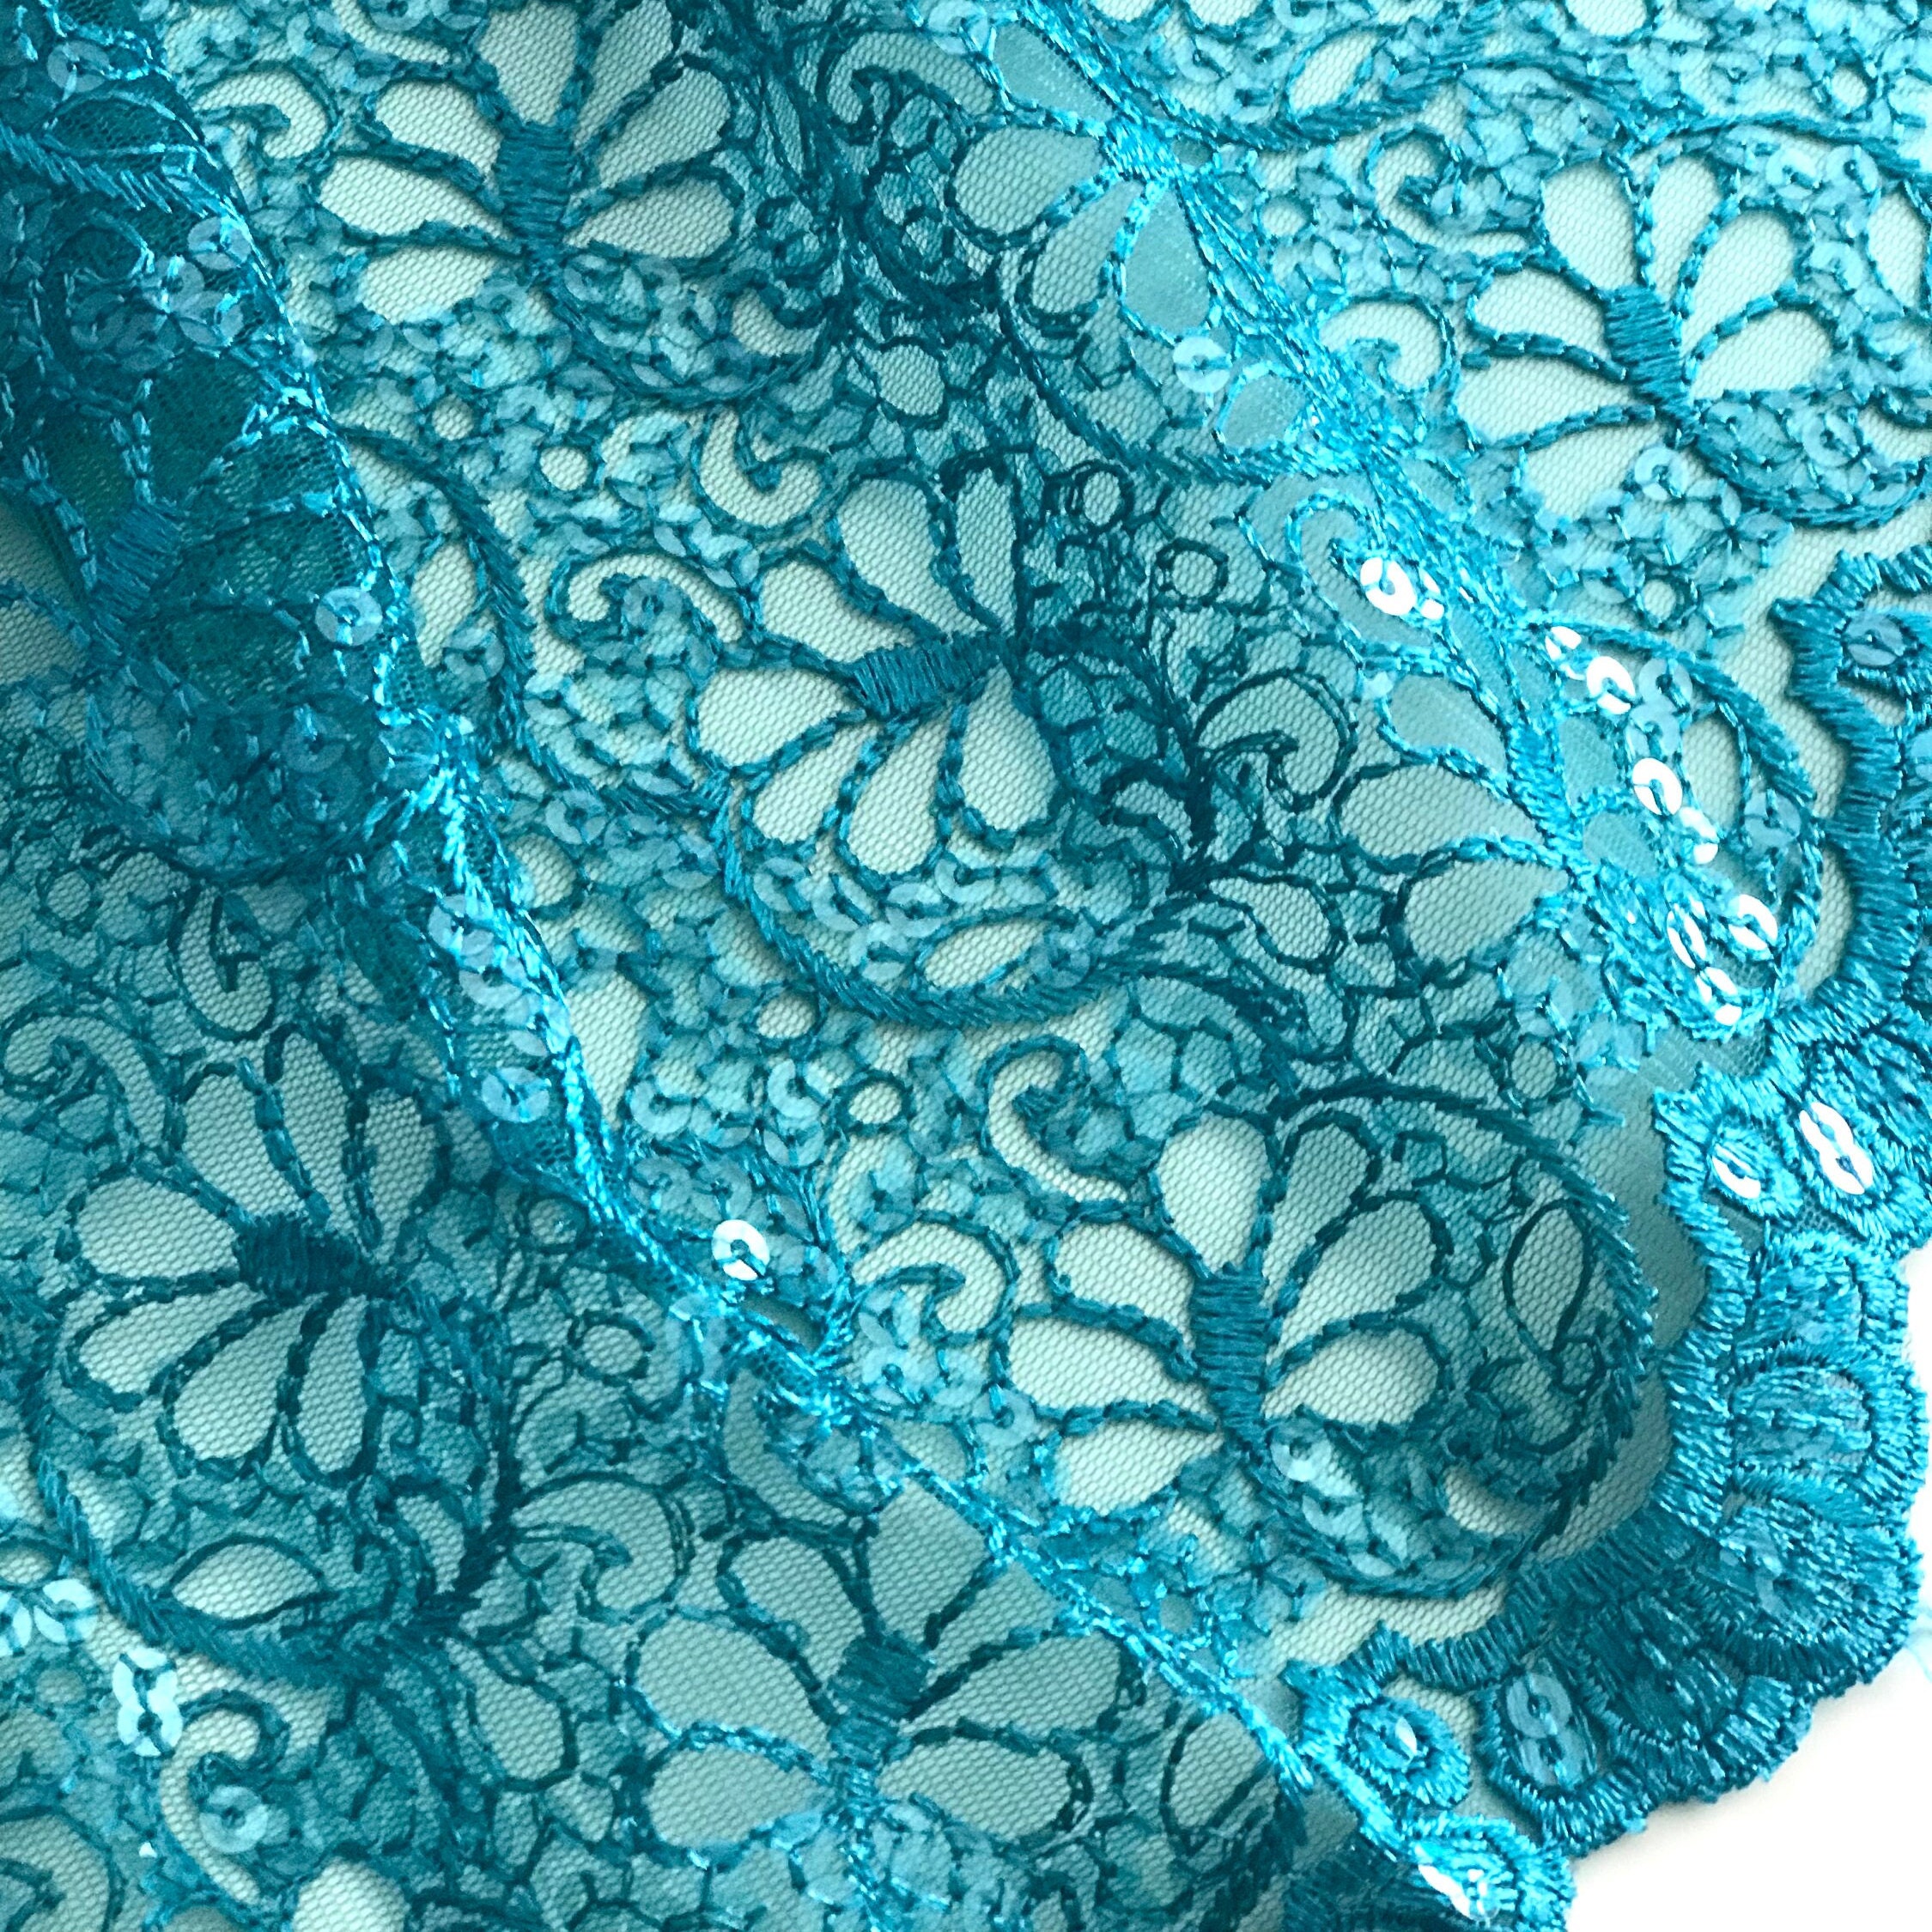 technique selection - How to do embroidery on tulle netting fabric? - Arts  & Crafts Stack Exchange